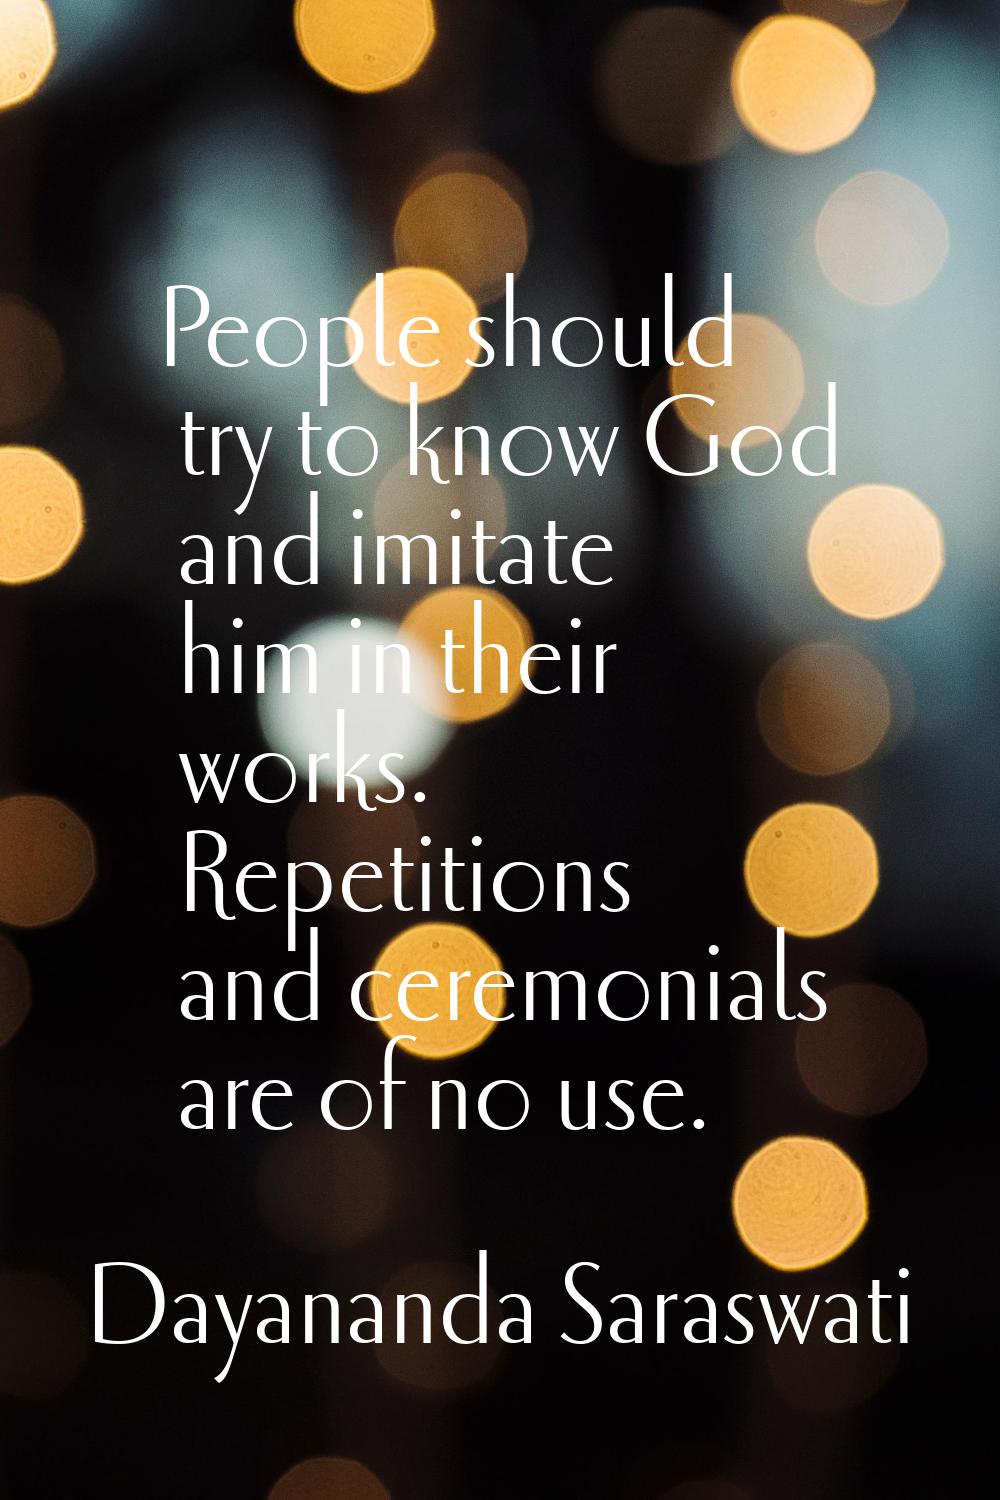 People should try to know God and imitate him in their works. Repetitions and ceremonials are of no